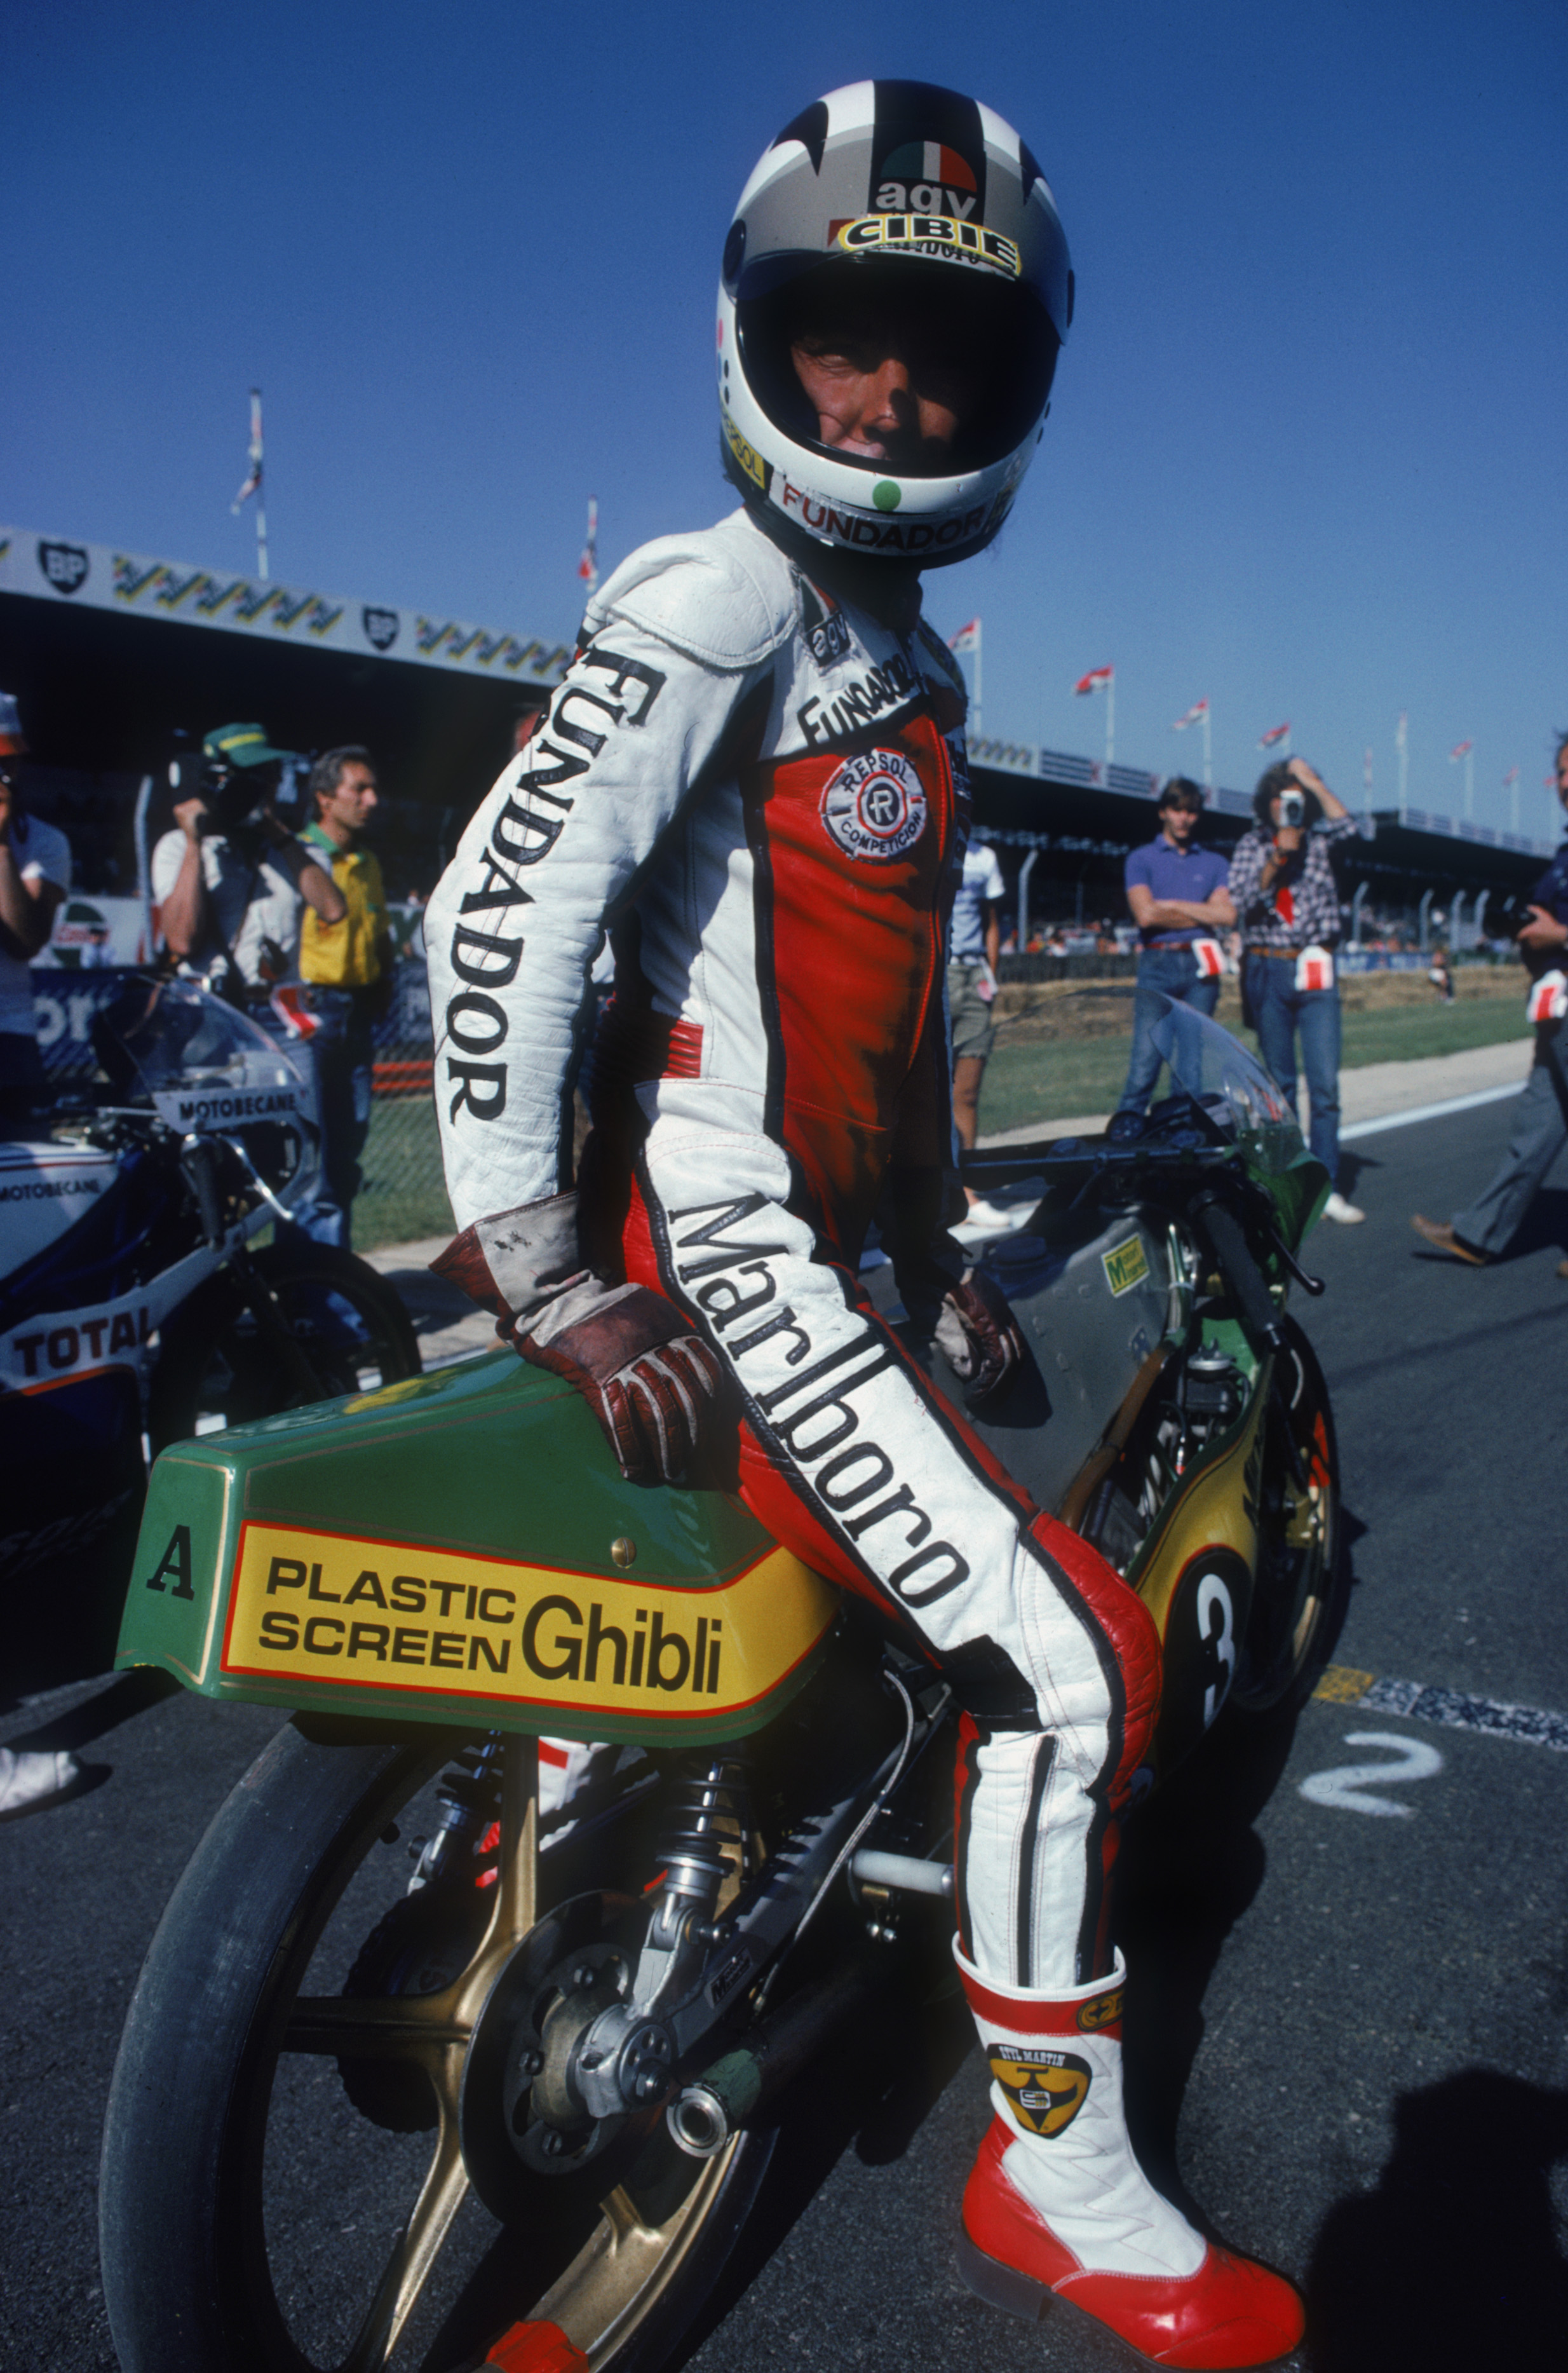 Top 10 GP riders of all time